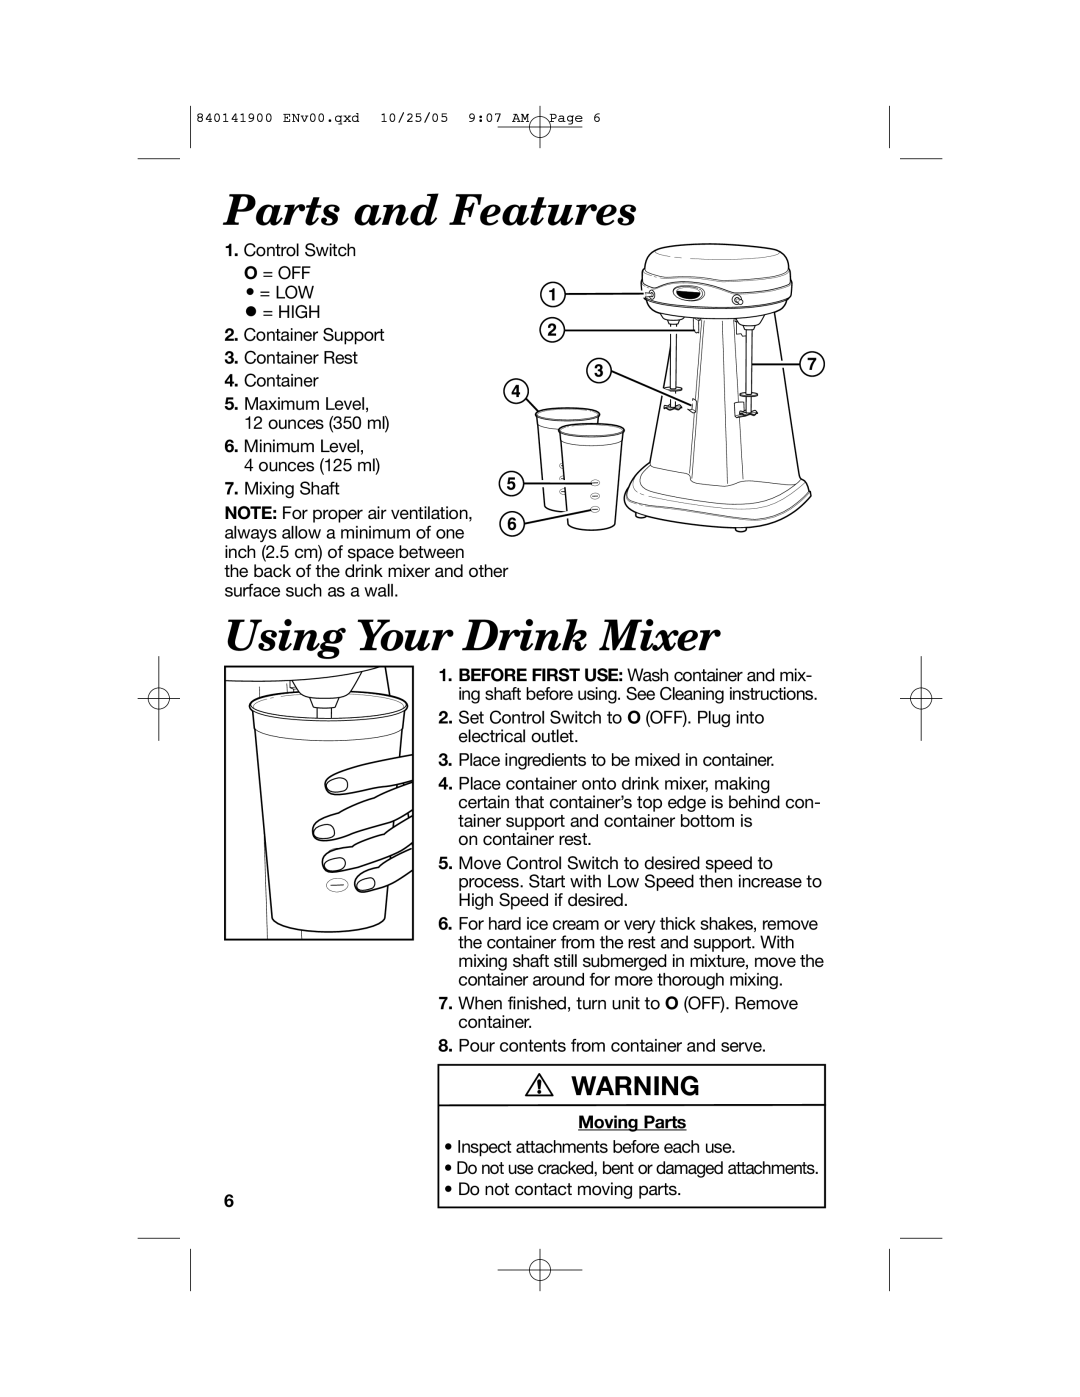 Hamilton Beach 840141900 manual Parts and Features, Using Your Drink Mixer, Moving Parts 